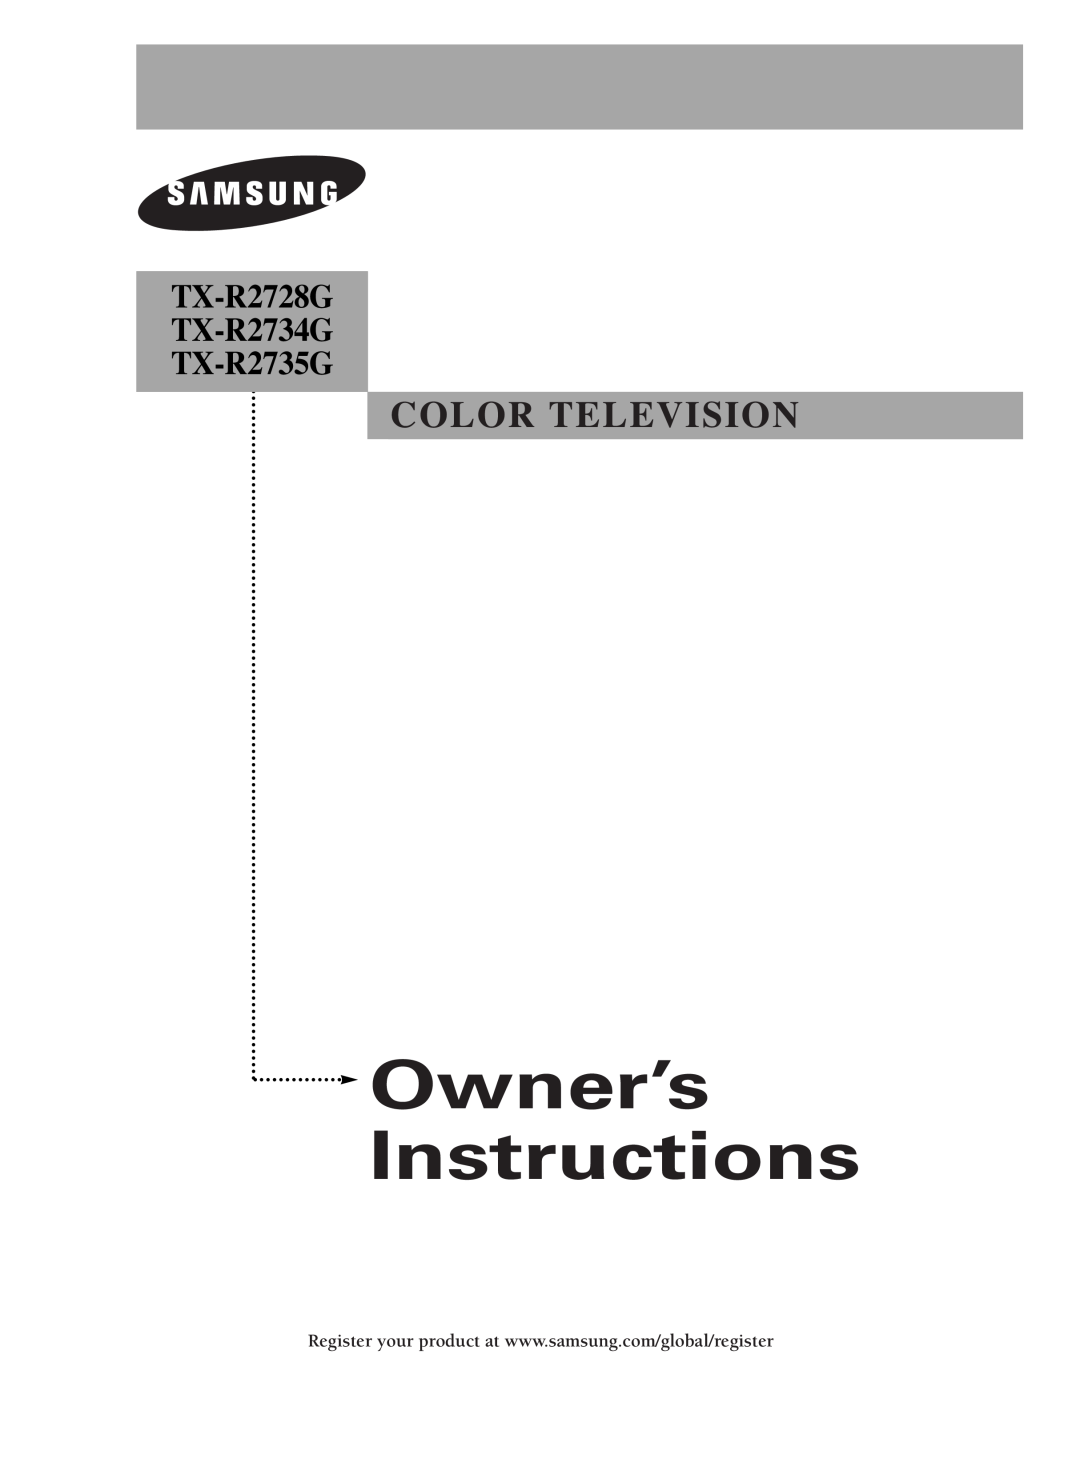 Samsung manual Owner’s Instructions, Color Television, TX-R2728G TX-R2734G TX-R2735G 